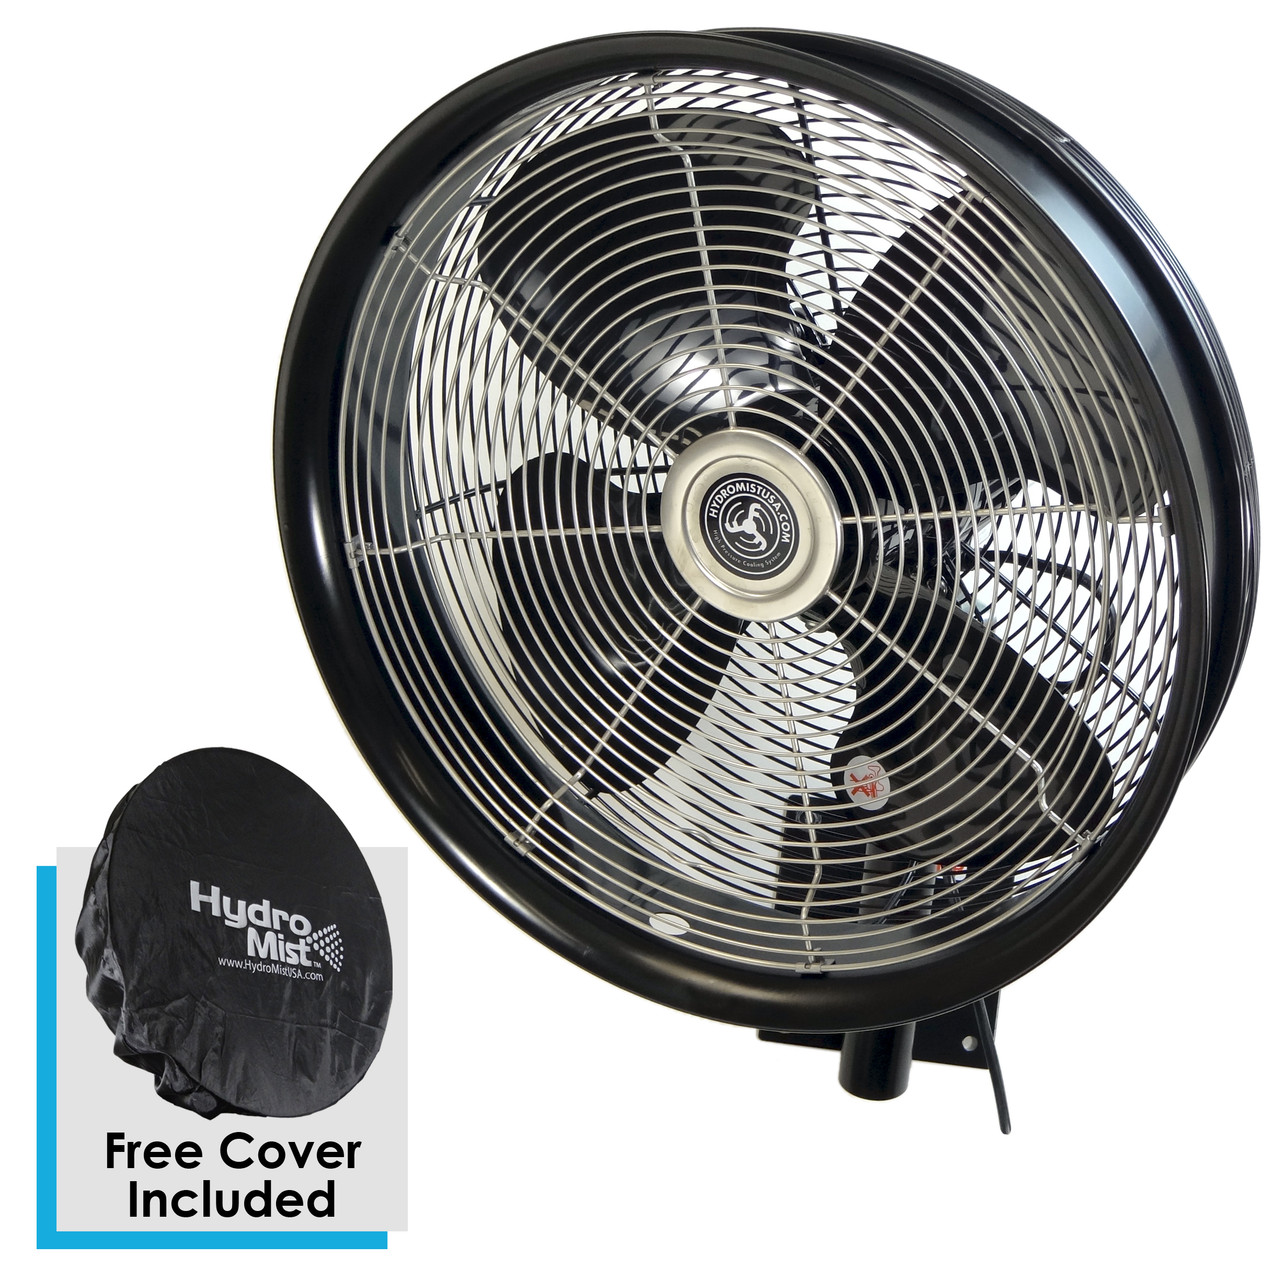 18 Inch Outdoor Wall Mount Oscillating Fan 3-Speed Control on Motor